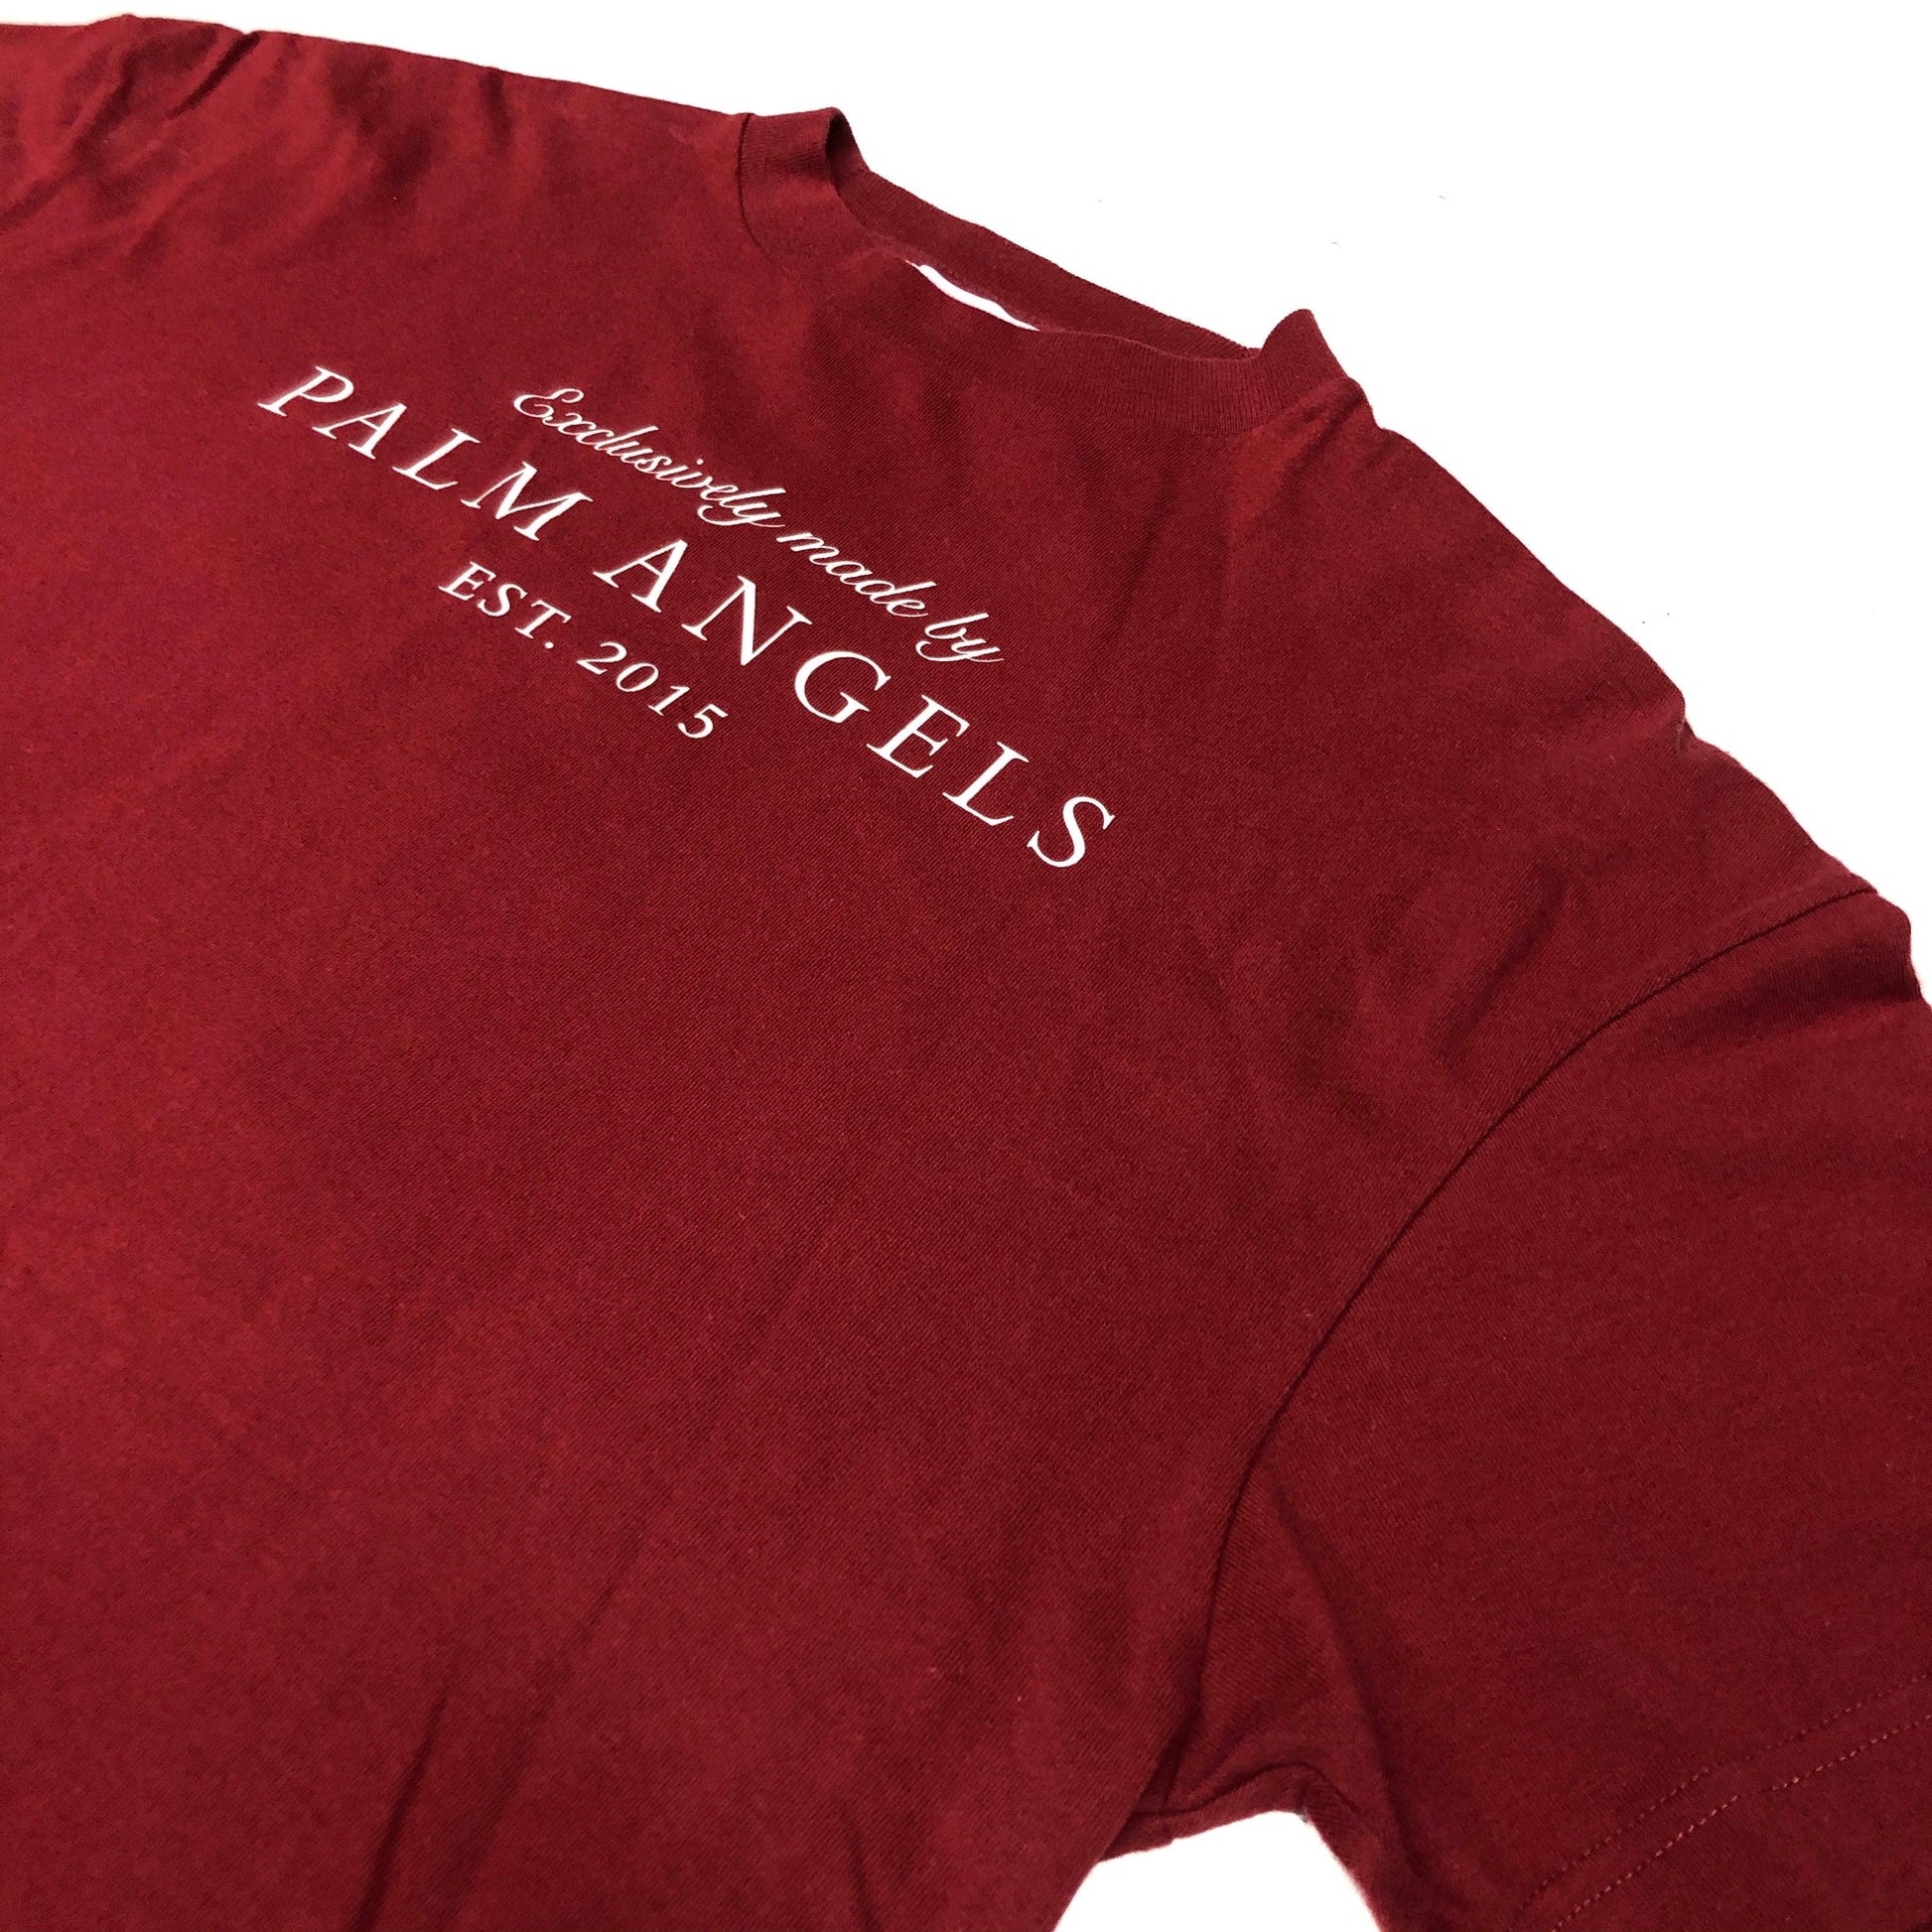 Palm Angels EST 2015 Spell Out Short Sleeved T Shirt with Back Print Initials - Known Source